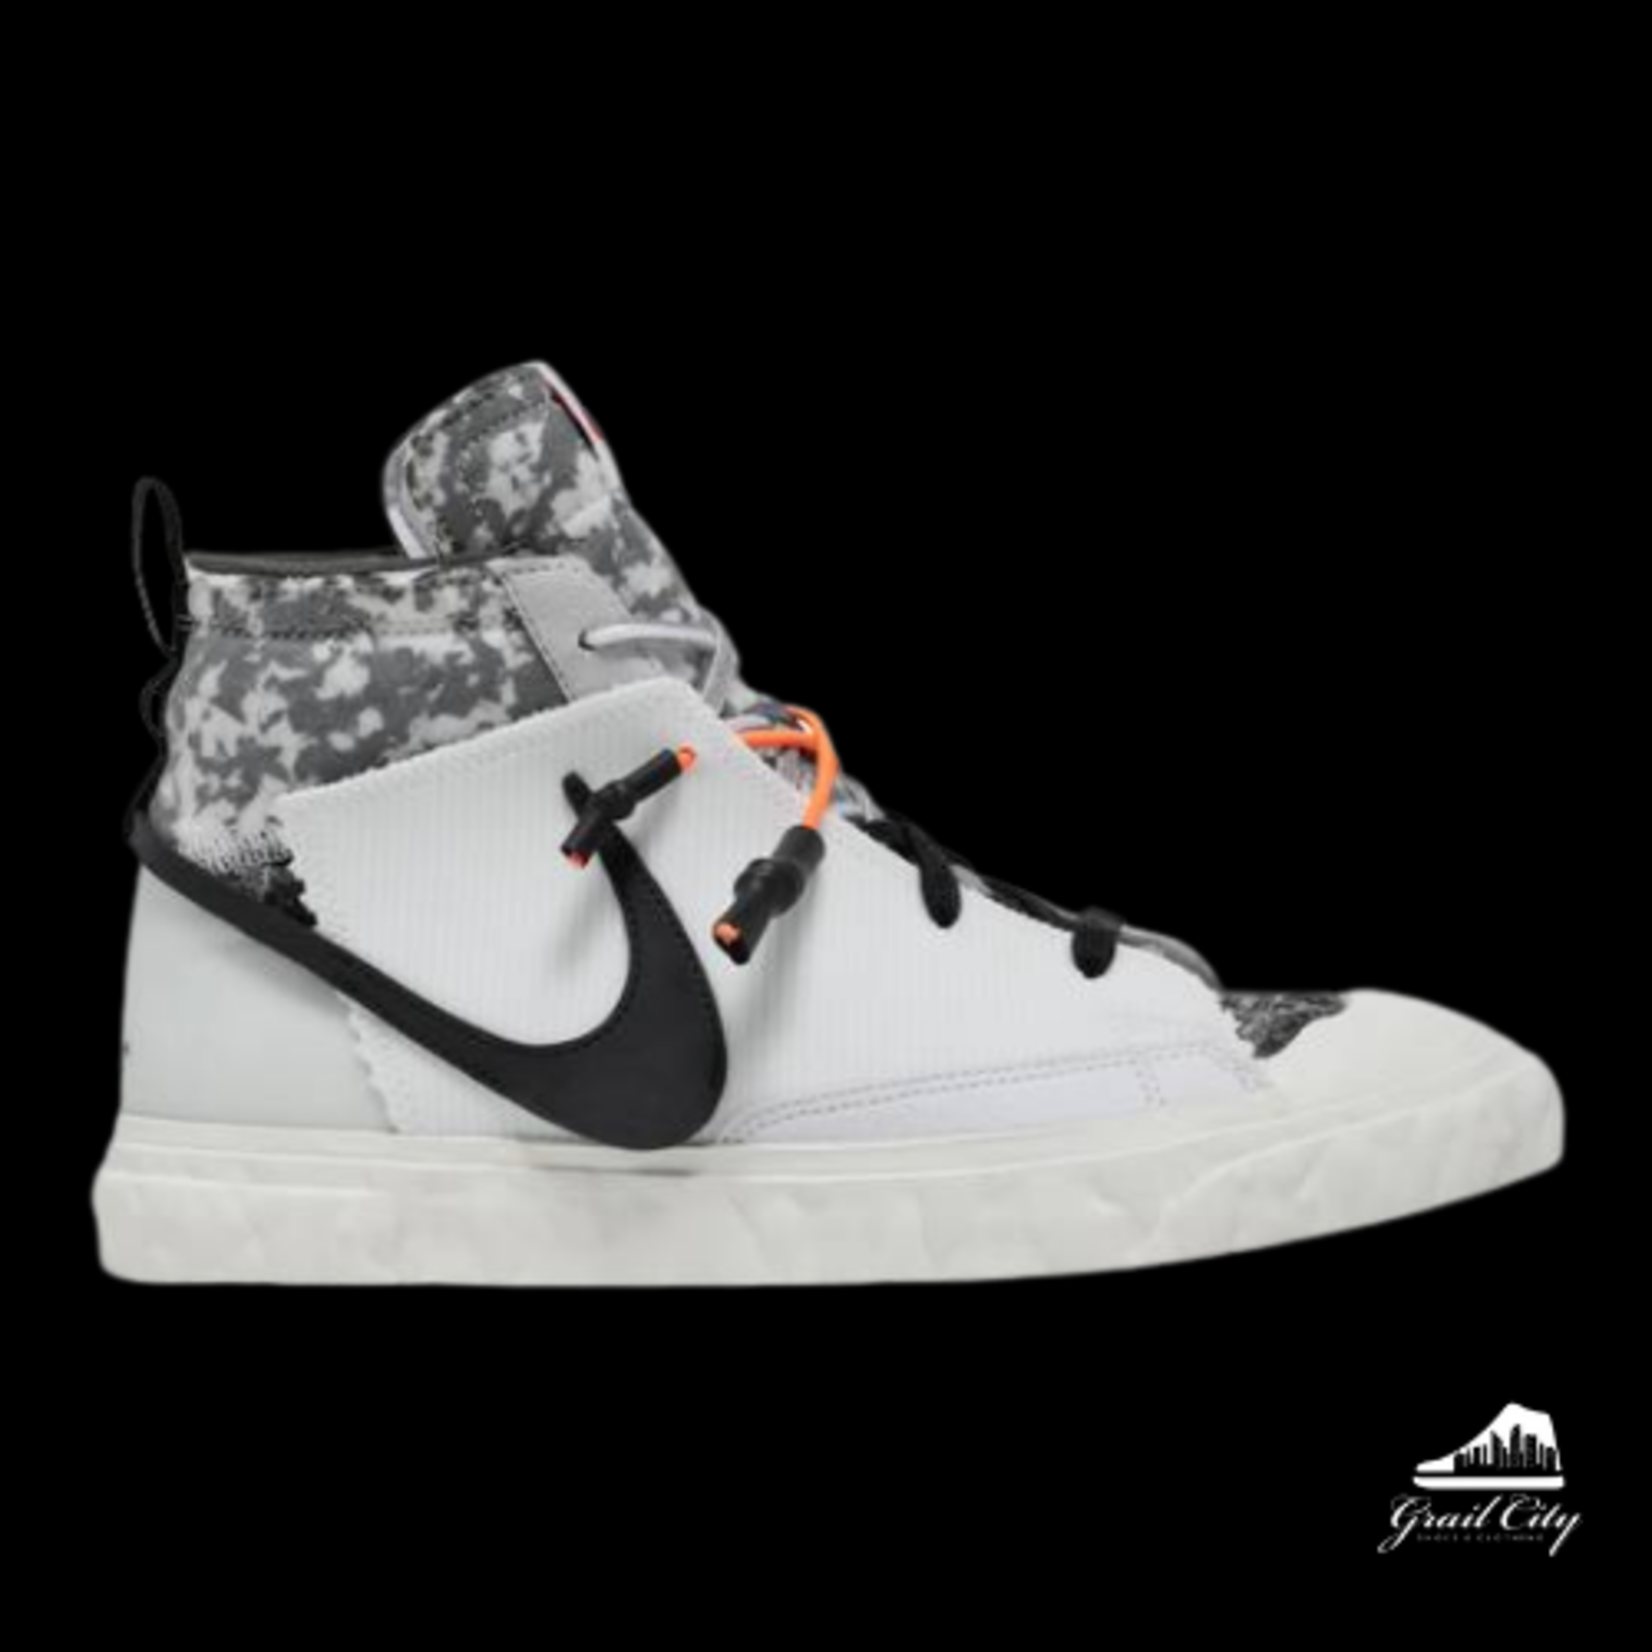 Nike Blazer Mid READYMADE White - Grail City Shoes and Clothing